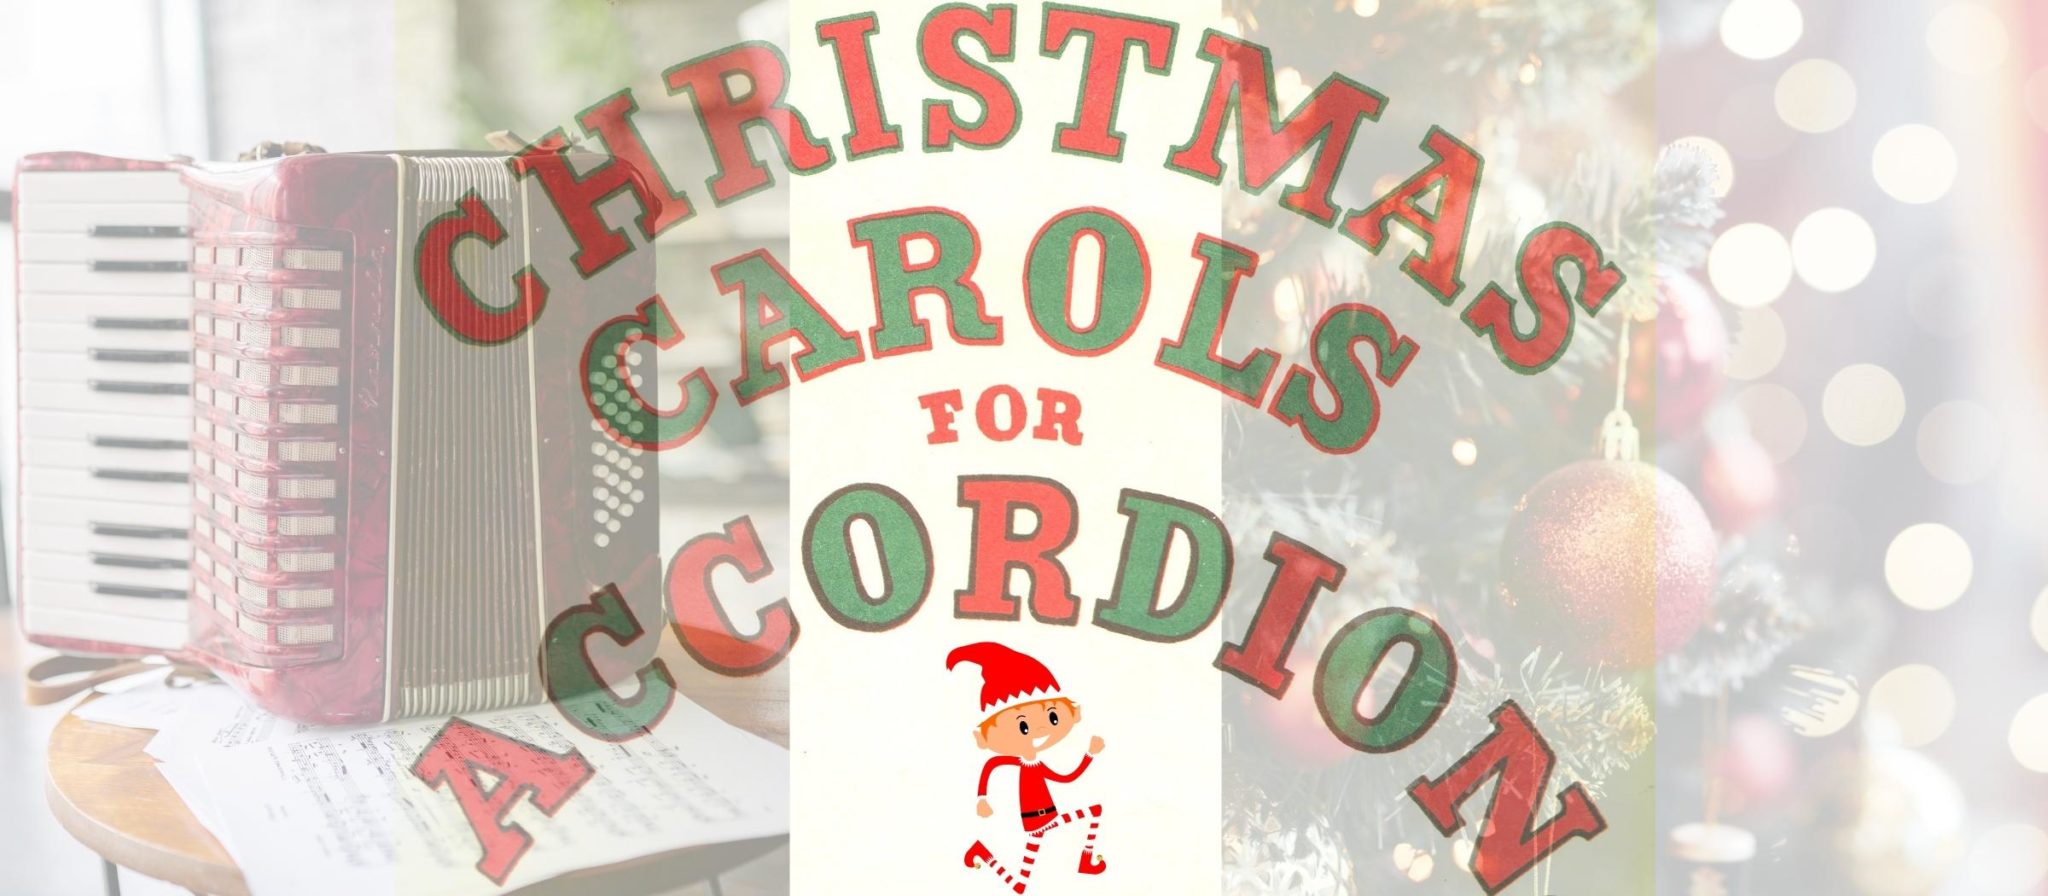 Best Accordion Christmas Carols and Melodies to learn this season – Accordion Buyer's Guides and 